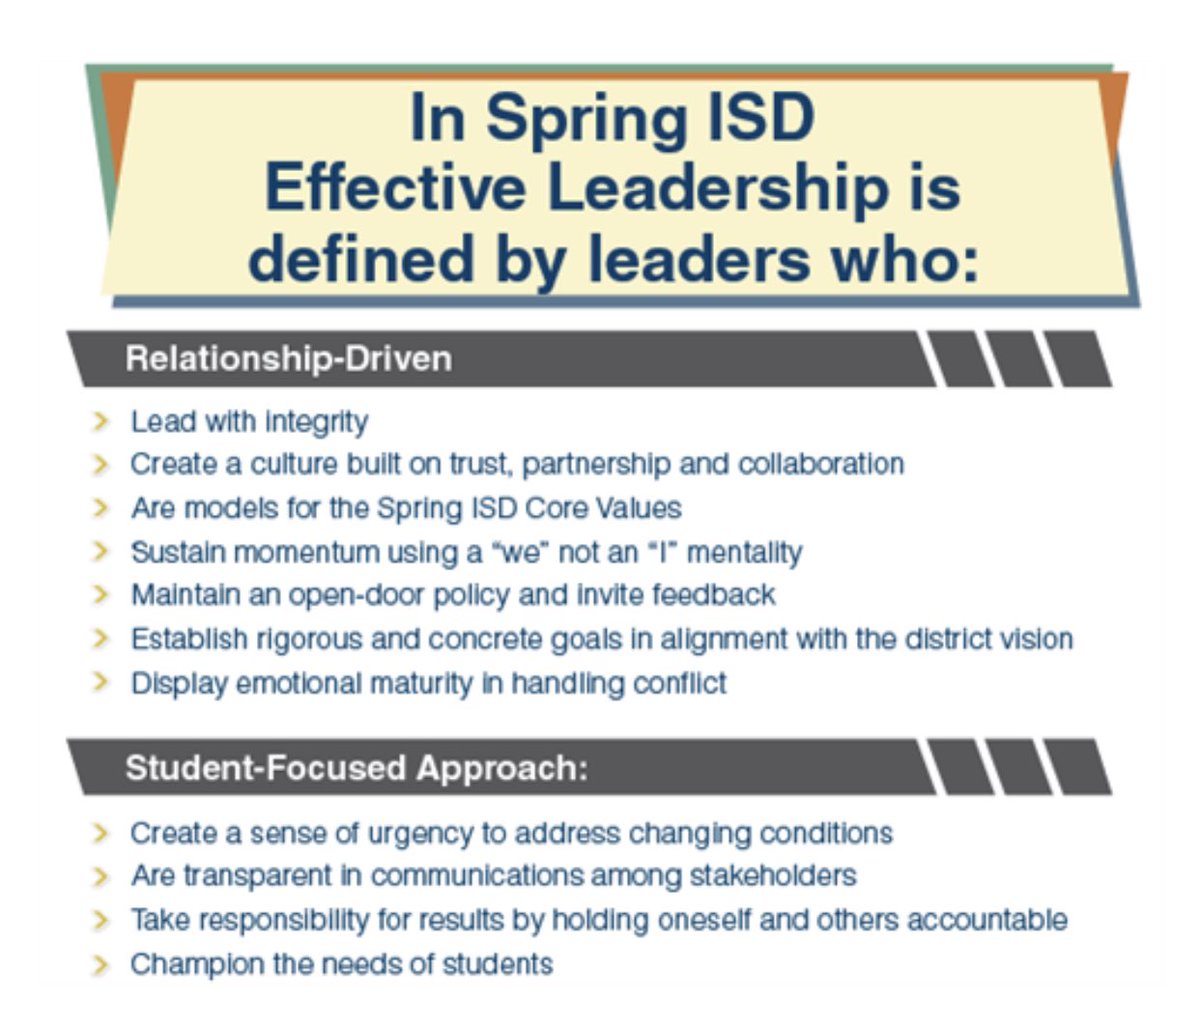 I am so excited to say LeadSpring is BACK! If you are interested in a rigorous leadership experience, with a Cohort model, within the district please visit springisd.org/leadspring for details on how to apply. The deadline is 9/26! #SOAR into leadership!